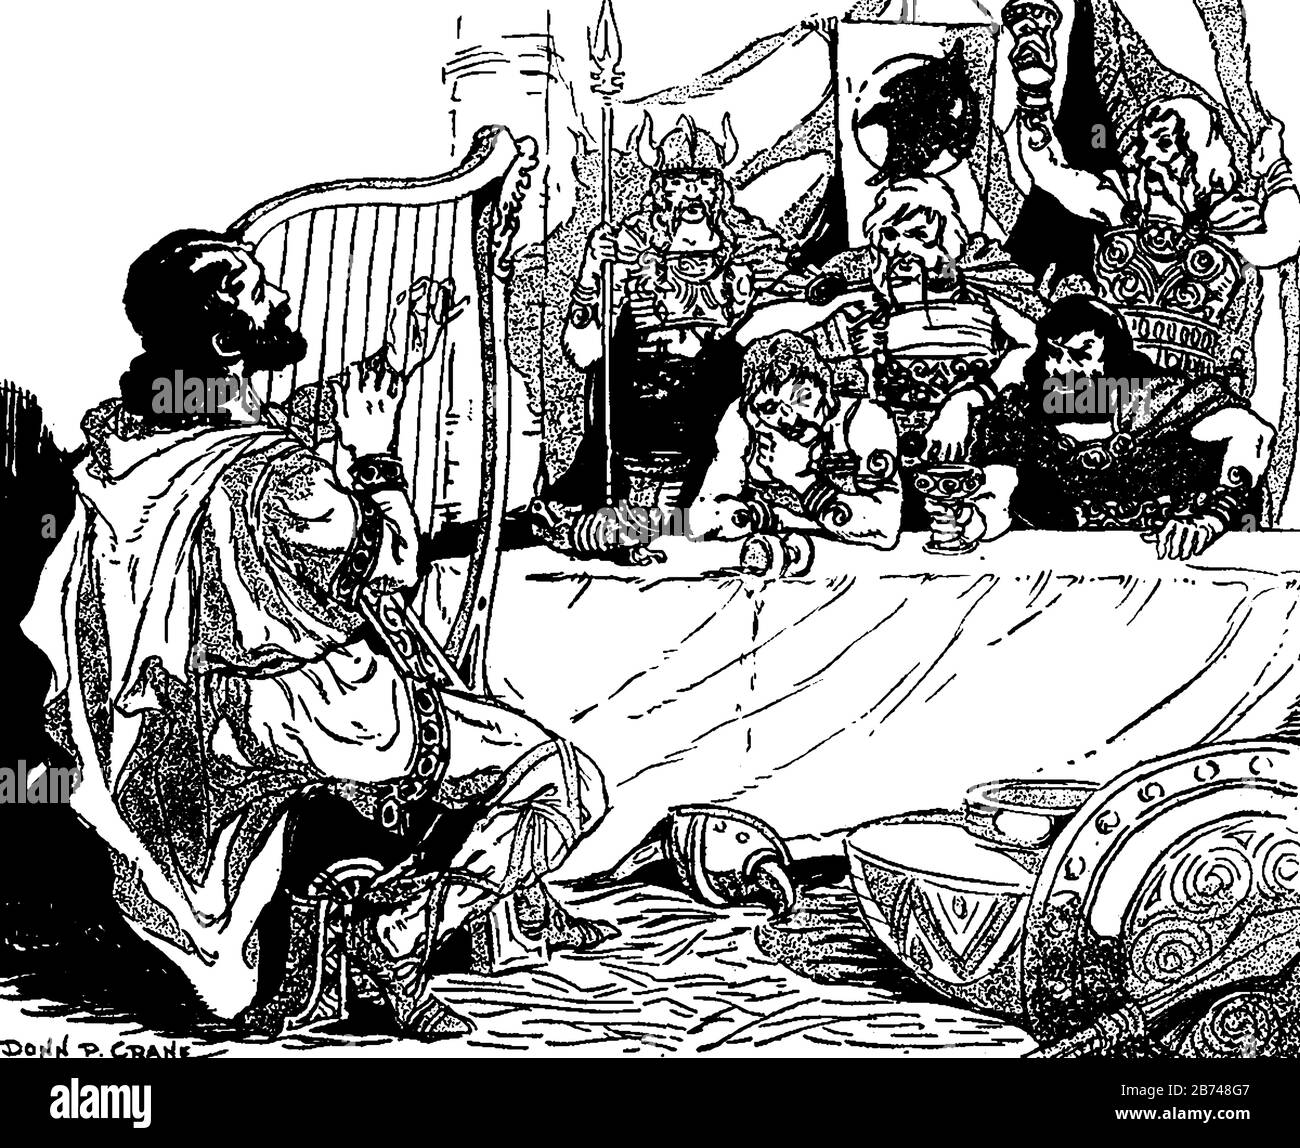 The king sitting near table and holding glass in hand and soldiers standing behind him, a man playing harp in front of them, vintage line drawing or e Stock Vector